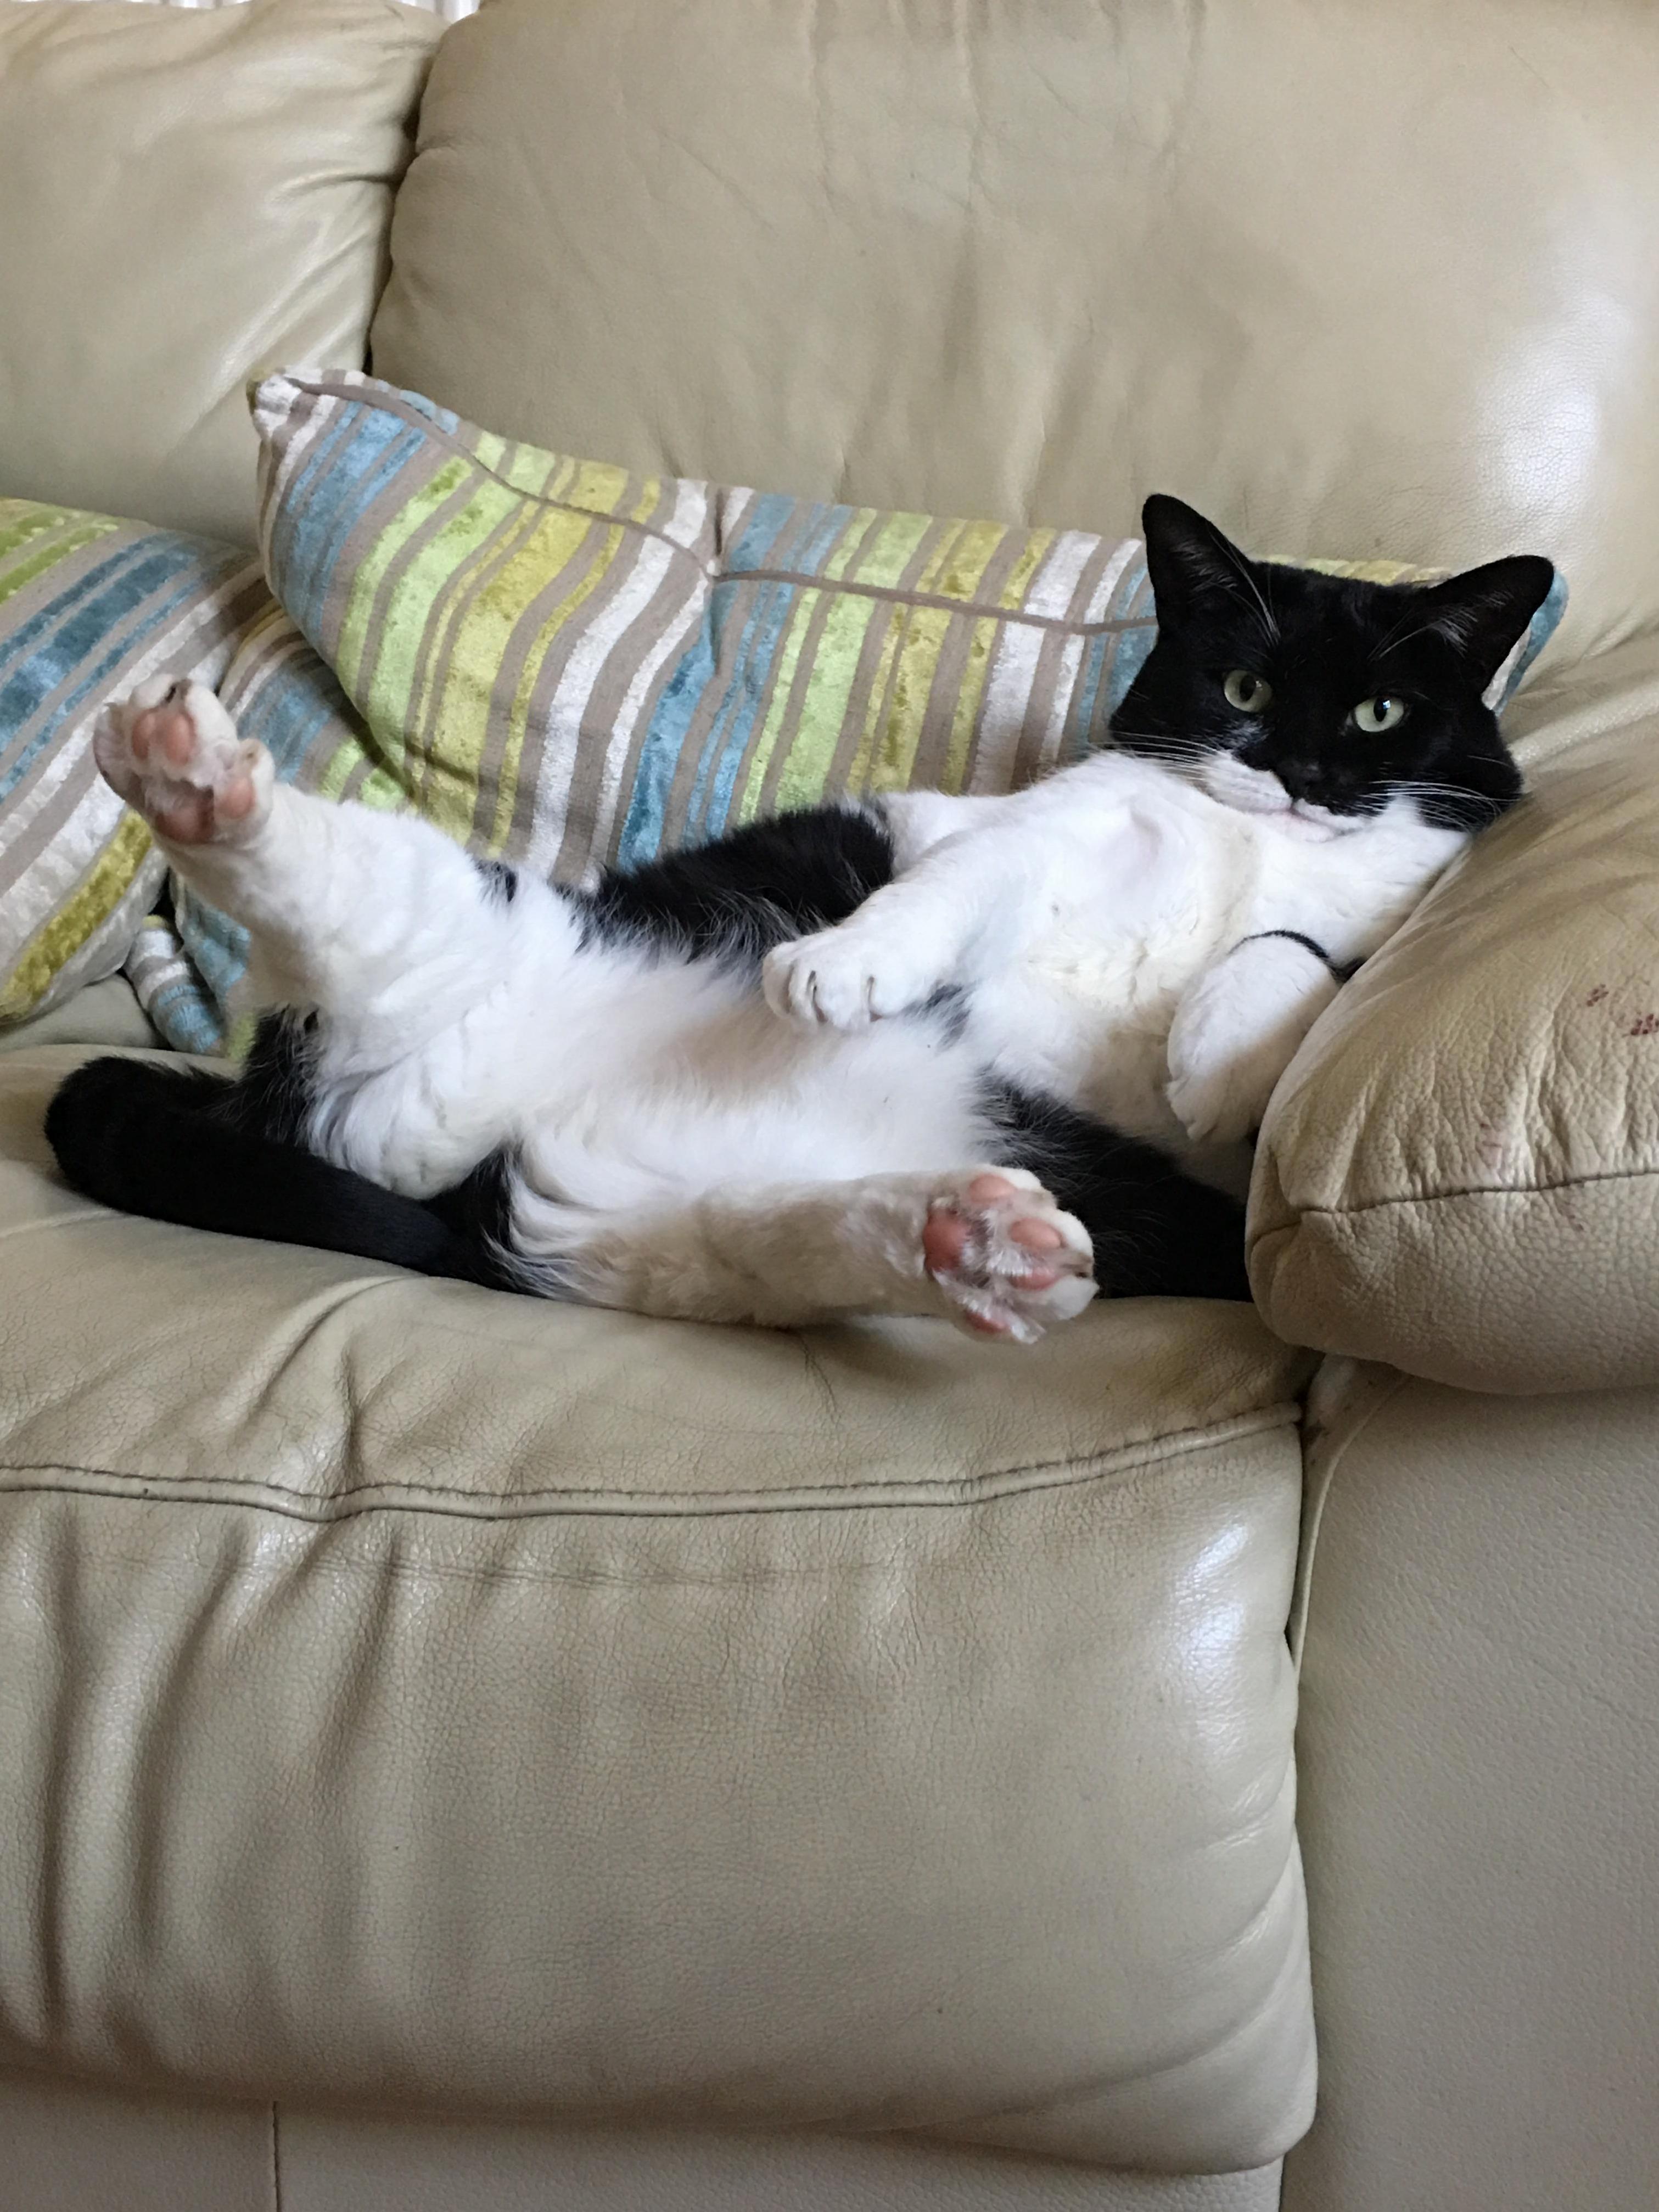 Comfy there